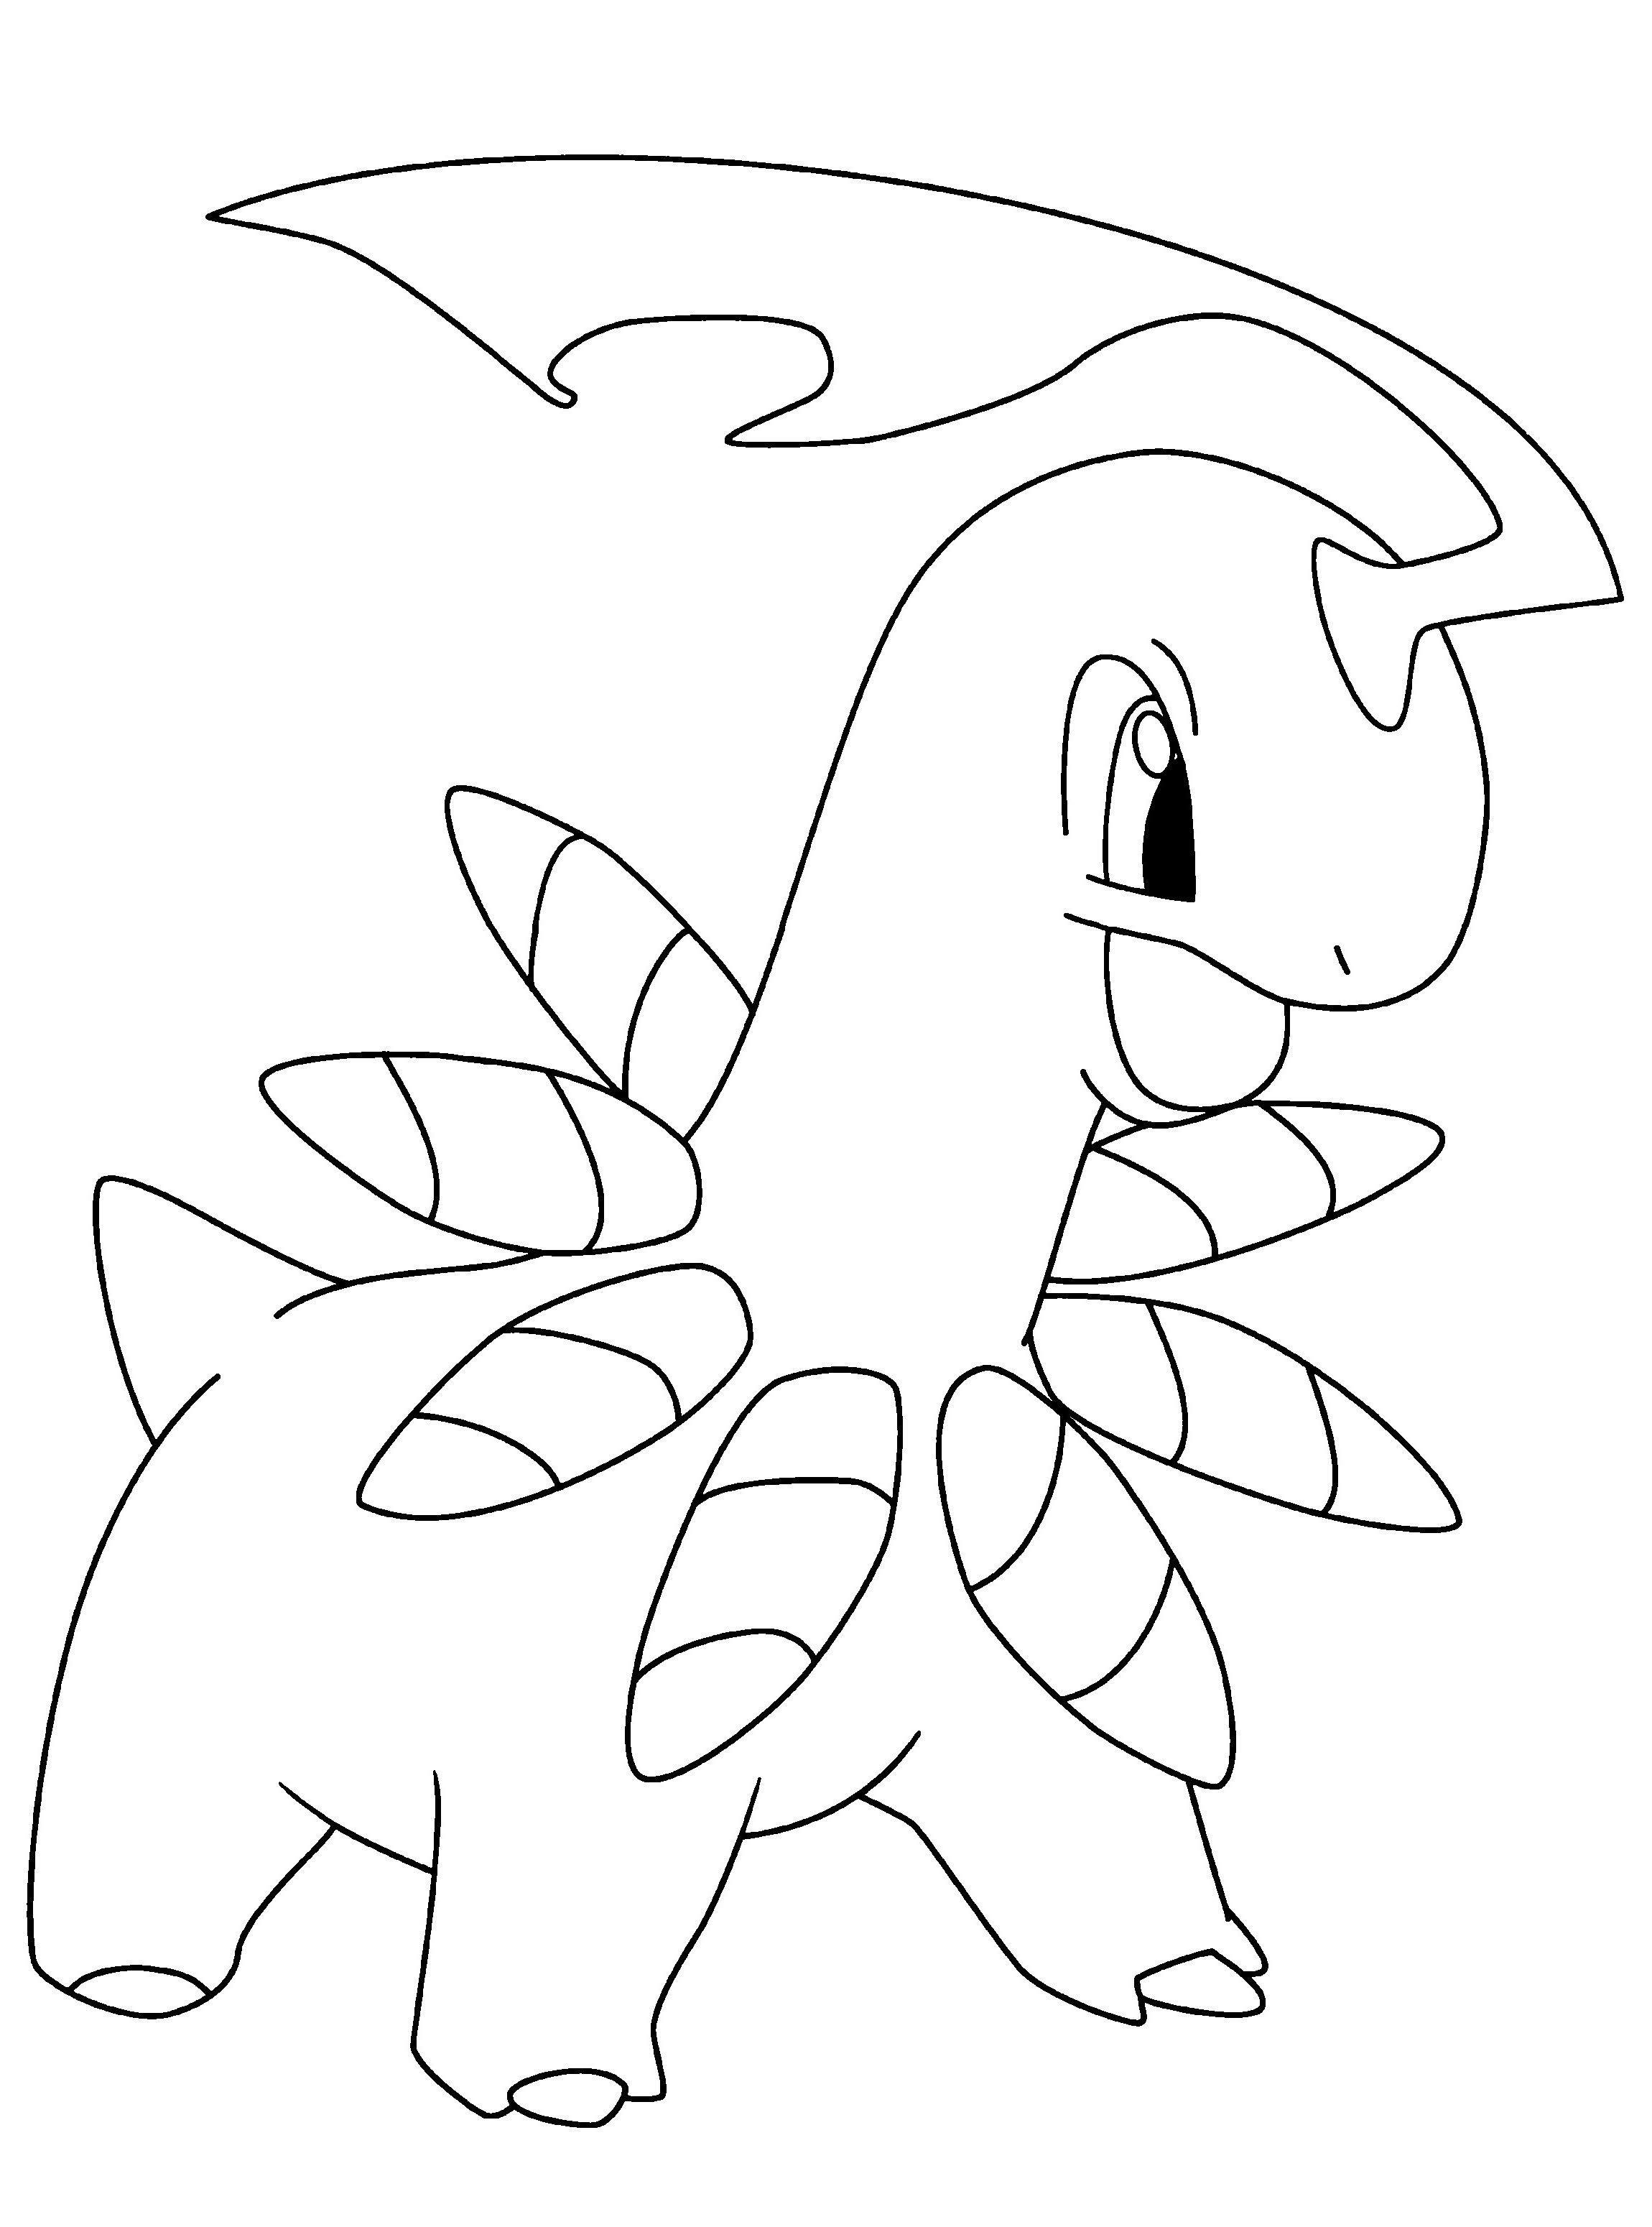 easy cool pokemon bayleef drawing art image pictures